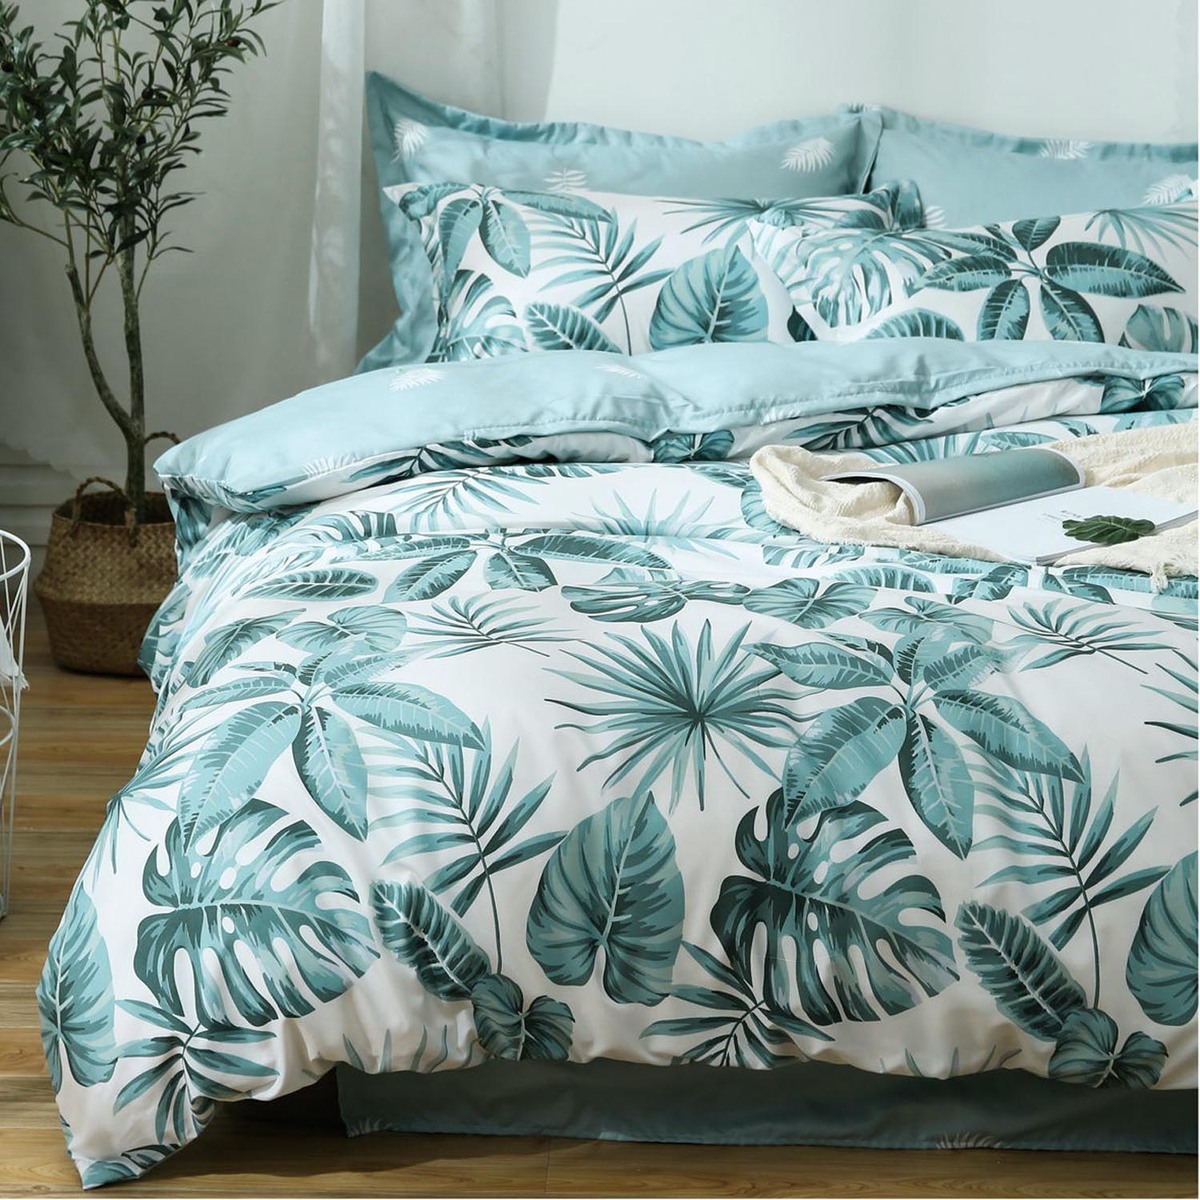 Luxton Clive Tropical Aqua Blue Quilt Cover Set in Queen/King Size